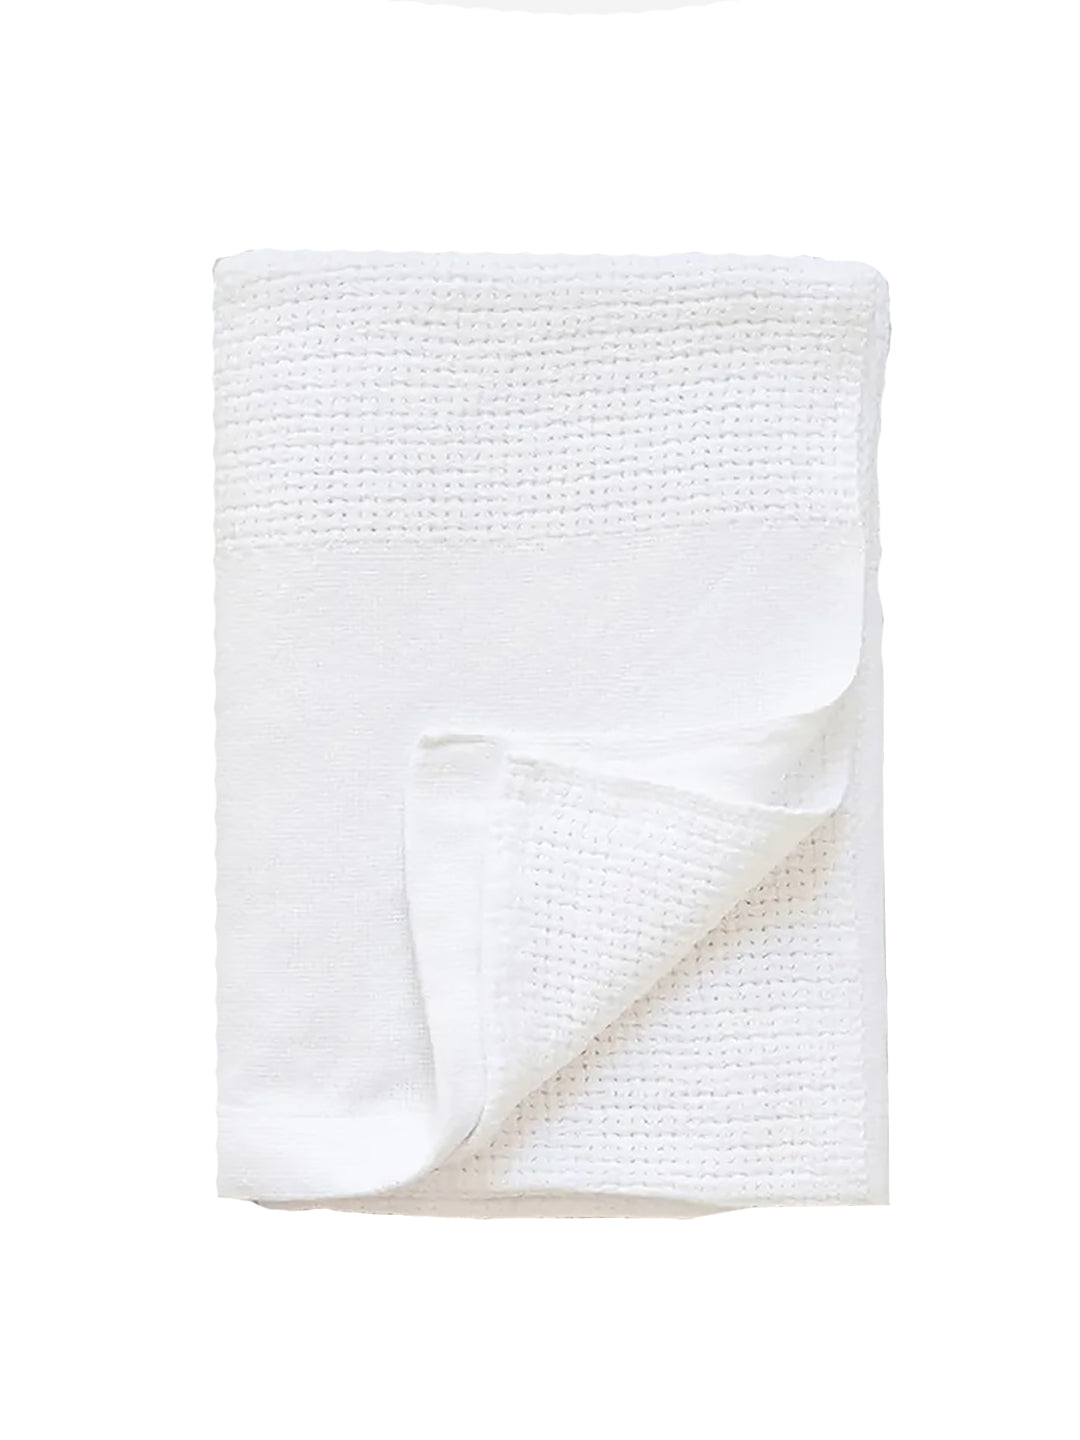 Cotton - highly absorbent, soft and long lasting - Mungo